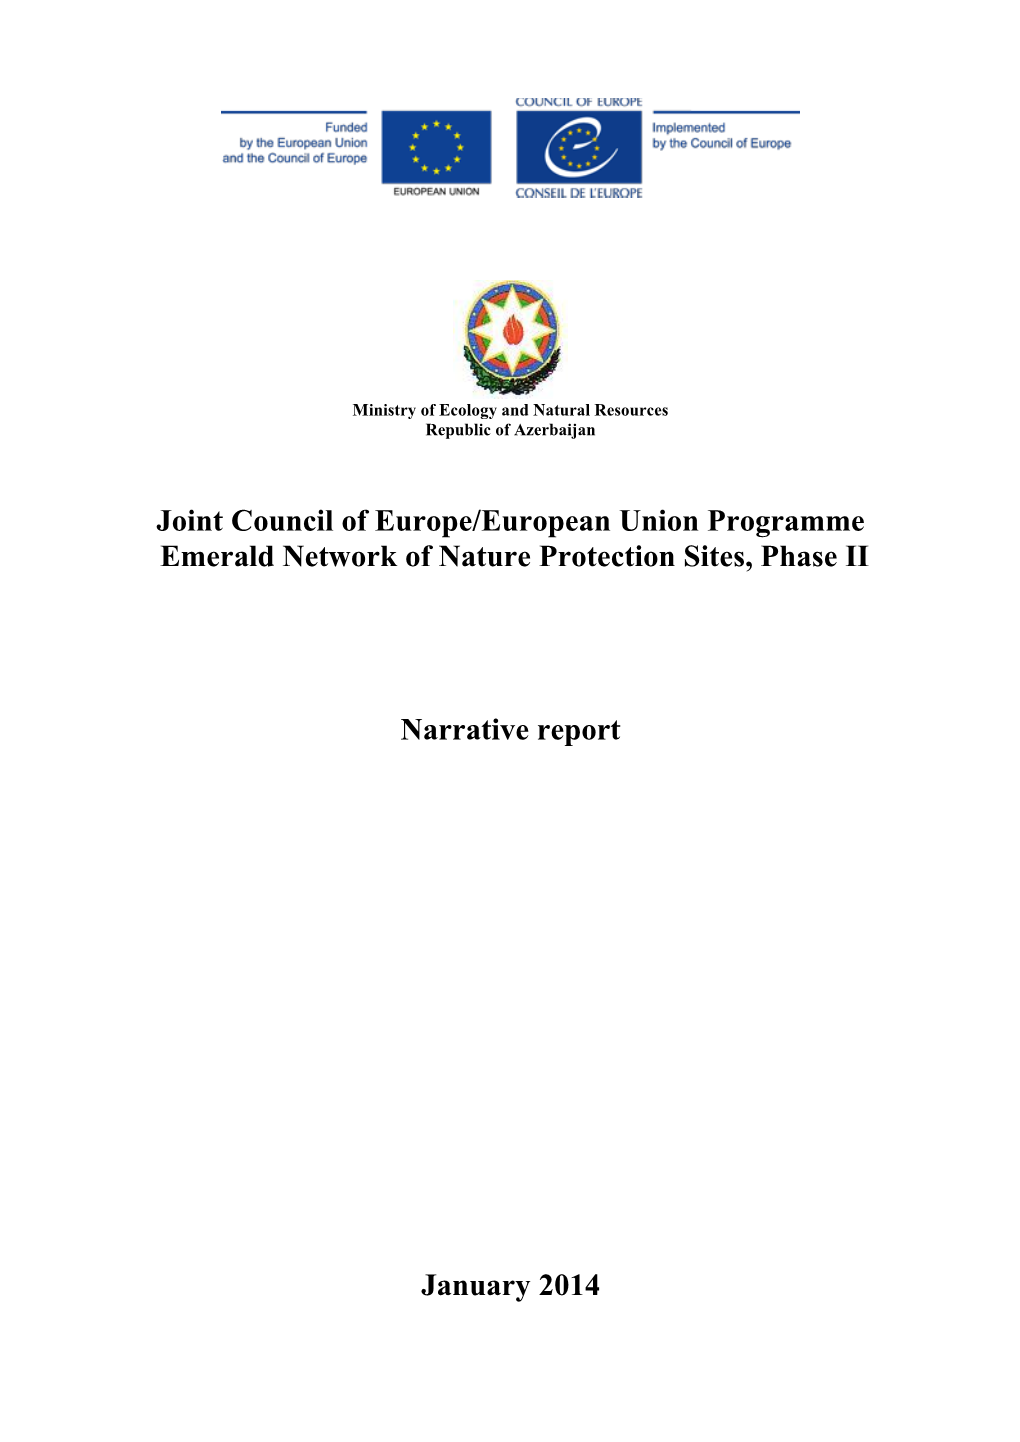 Joint Council of Europe/European Union Programme Emerald Network of Nature Protection Sites, Phase II